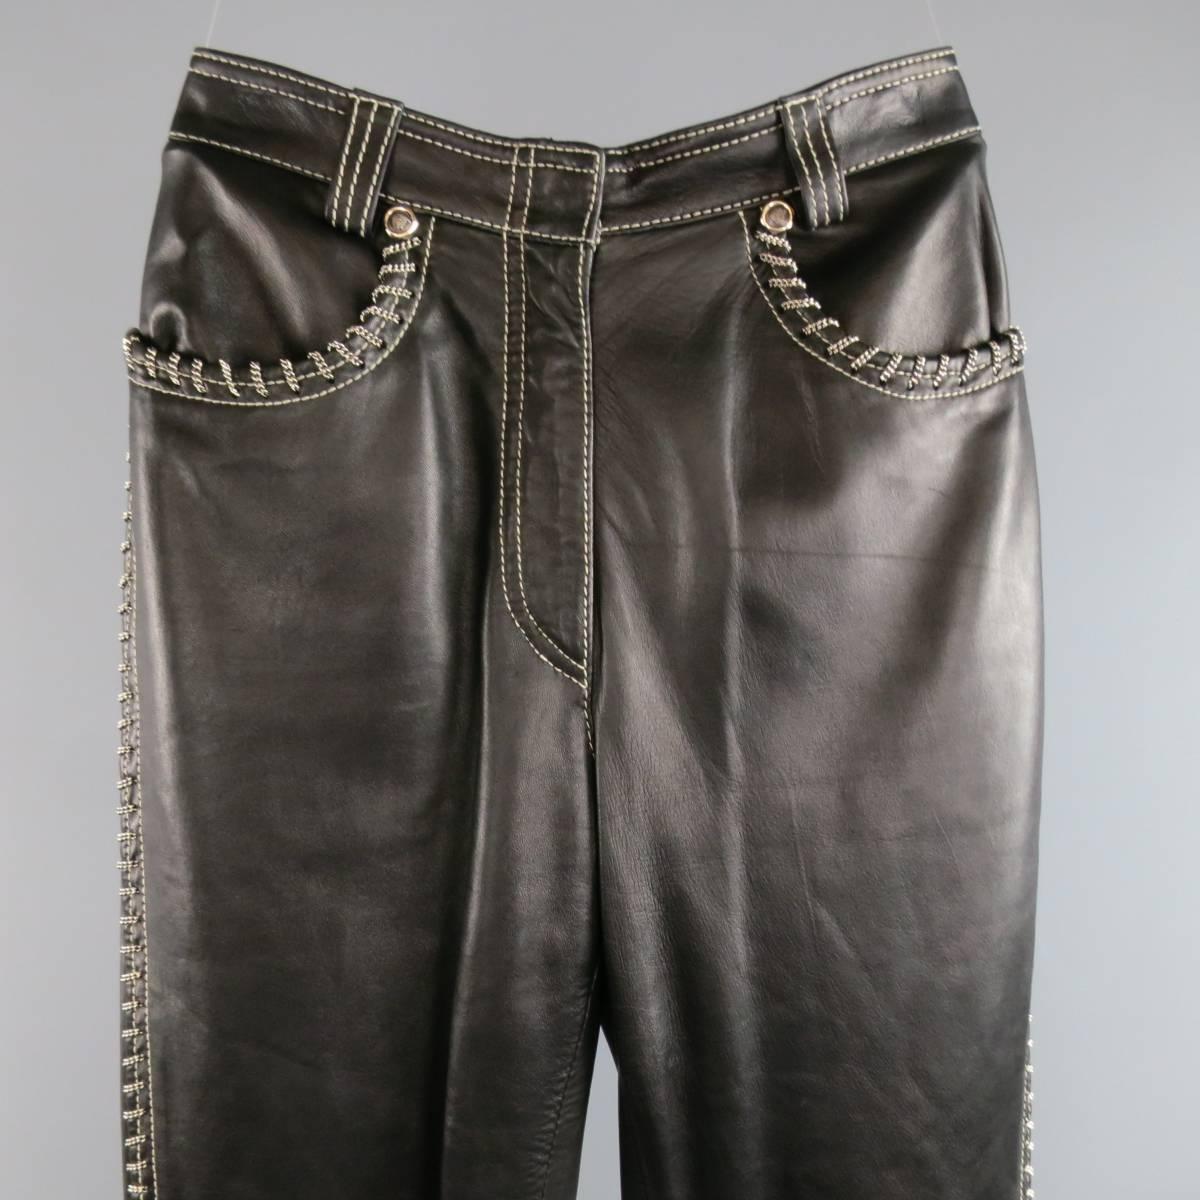 Vintage GIANNI VERSACE black leather pants feature all-over white white stitching and chain link detailing, zipper fly closure, Medusa head rivets, zipper detailing at the hems and zipper flap pockets in the back. Partially lined. With Tags. Made in